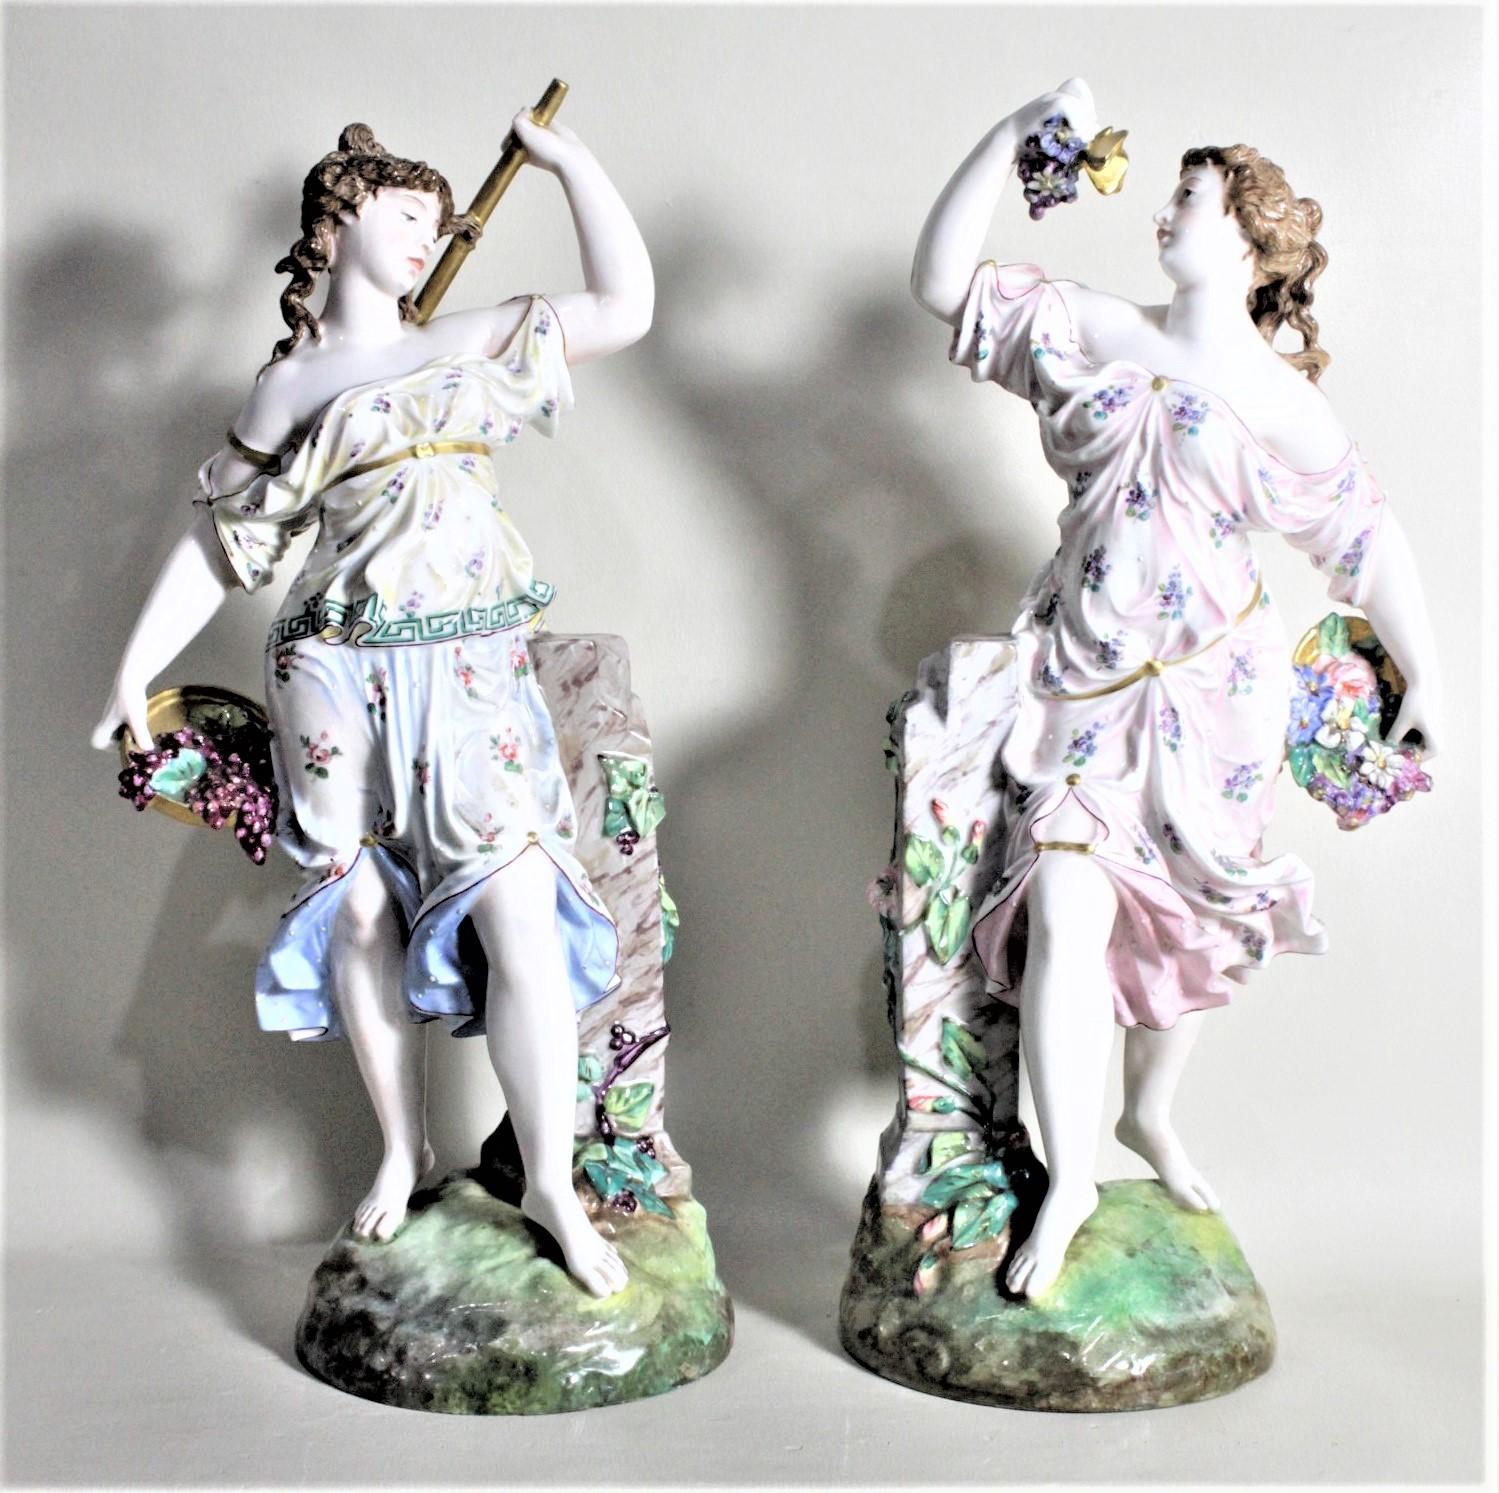 This pair of antique porcelain figurines are marked on their respective bases, but the specific maker cannot be identified. It is presumed this pair of figurines was made in either Germany or Austria in circa 1895 in the period Victorian style. The